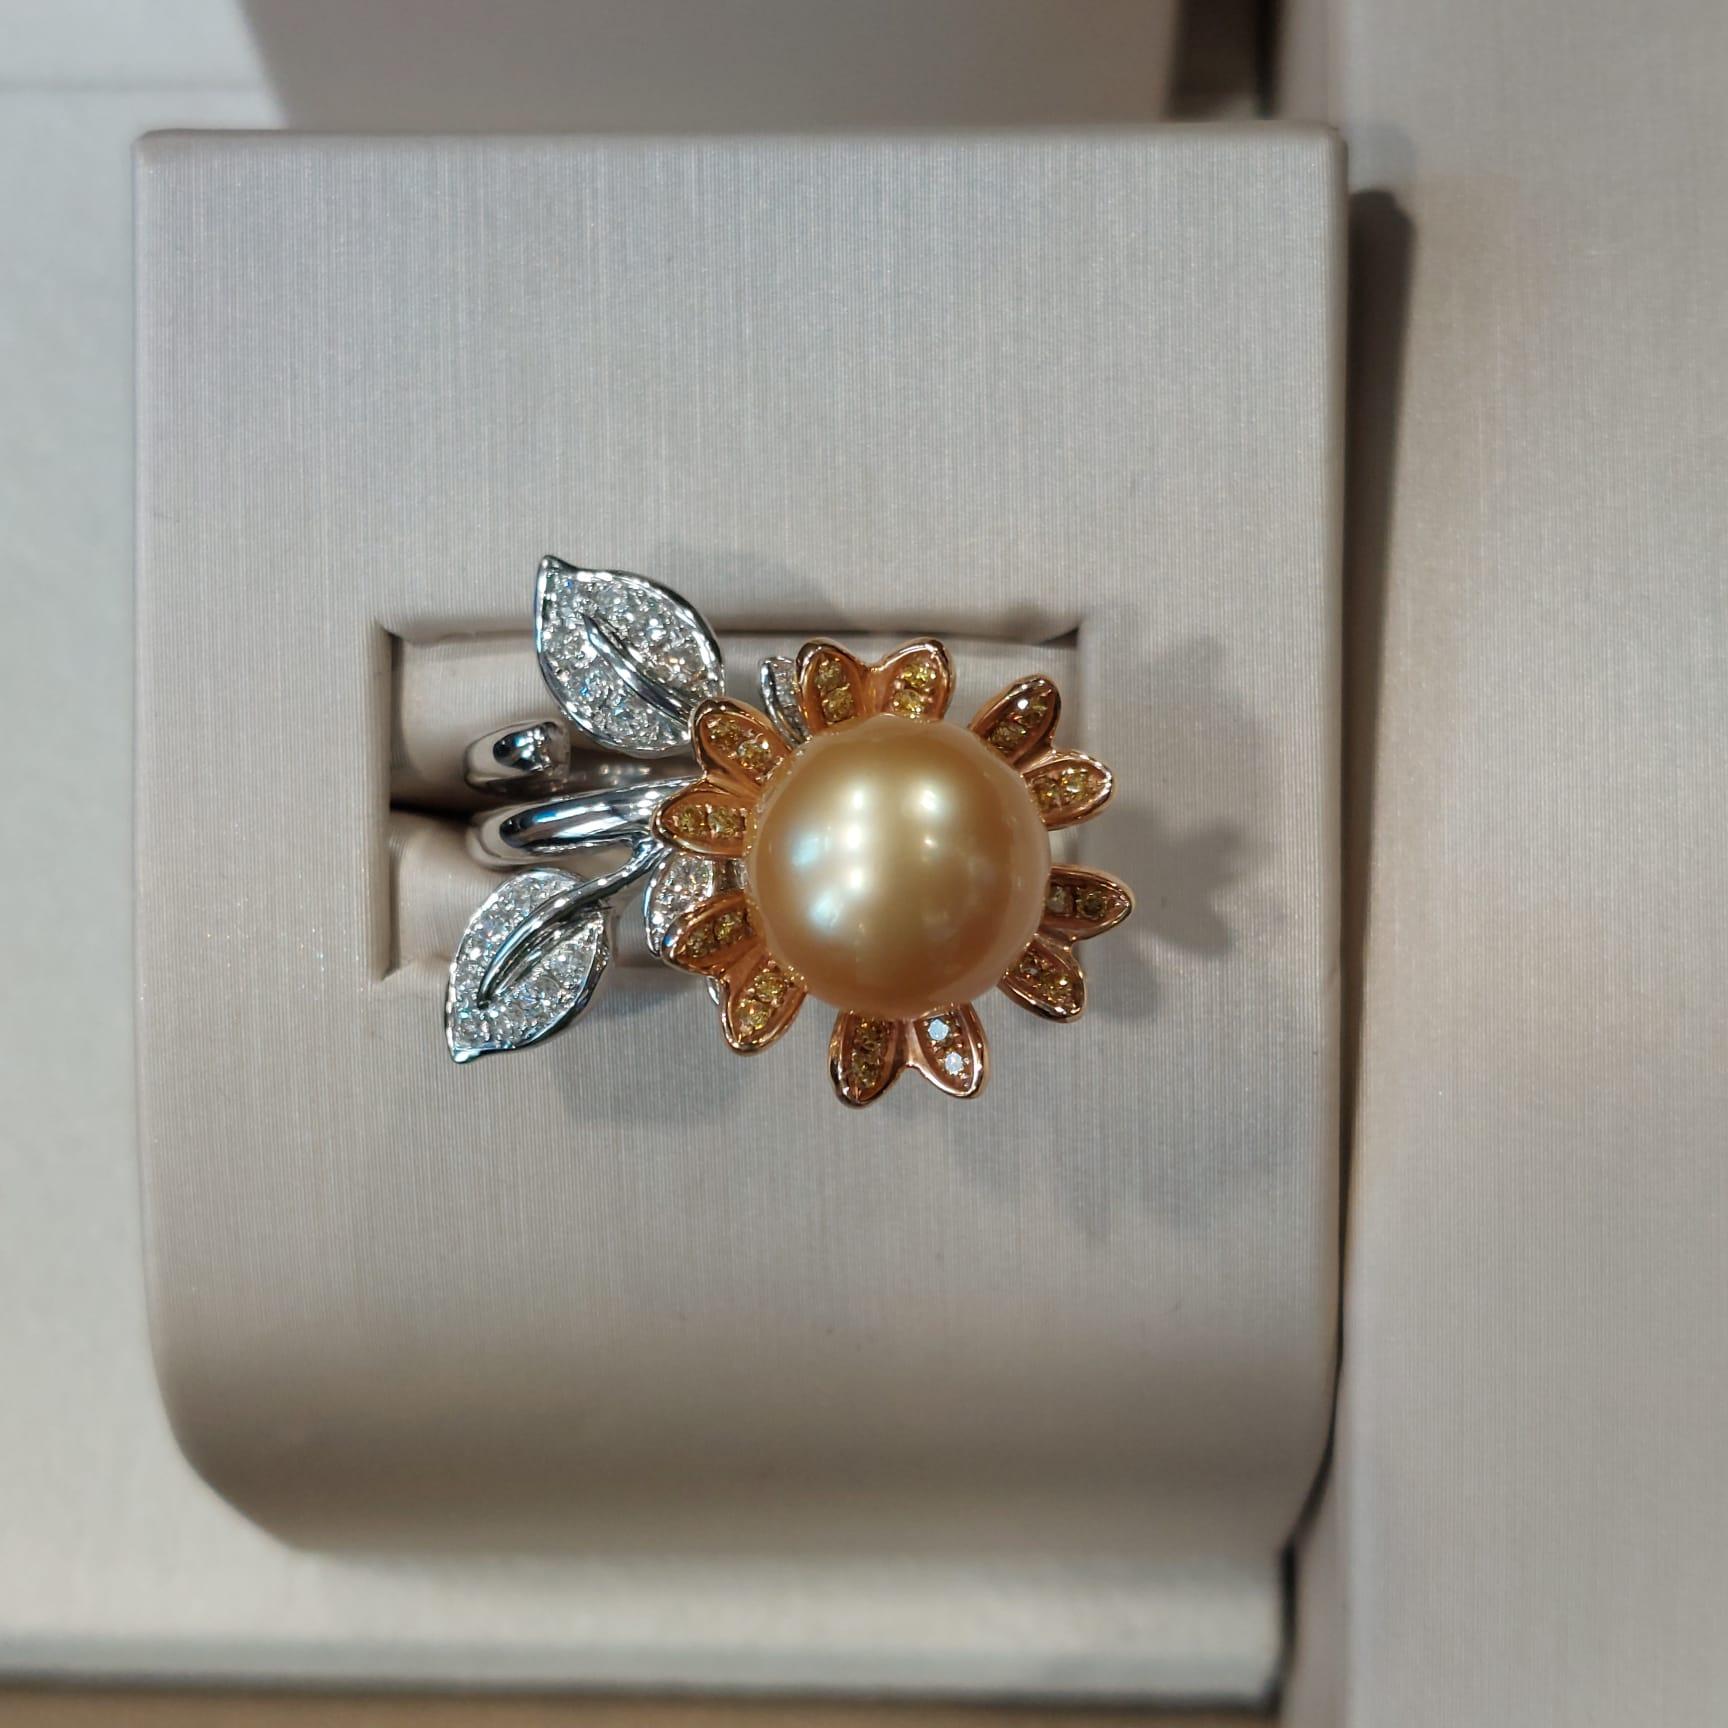 Pearls symbolize loyalty, integrity, generosity, and purity, elegant and unique.

The center pearl is 11.5mm x 11.7mm, diamond totally is 24 pieces 0.39 carat, yellow diamond totally is 26 pieces 0.33 carat, made in 18K white rose gold.
